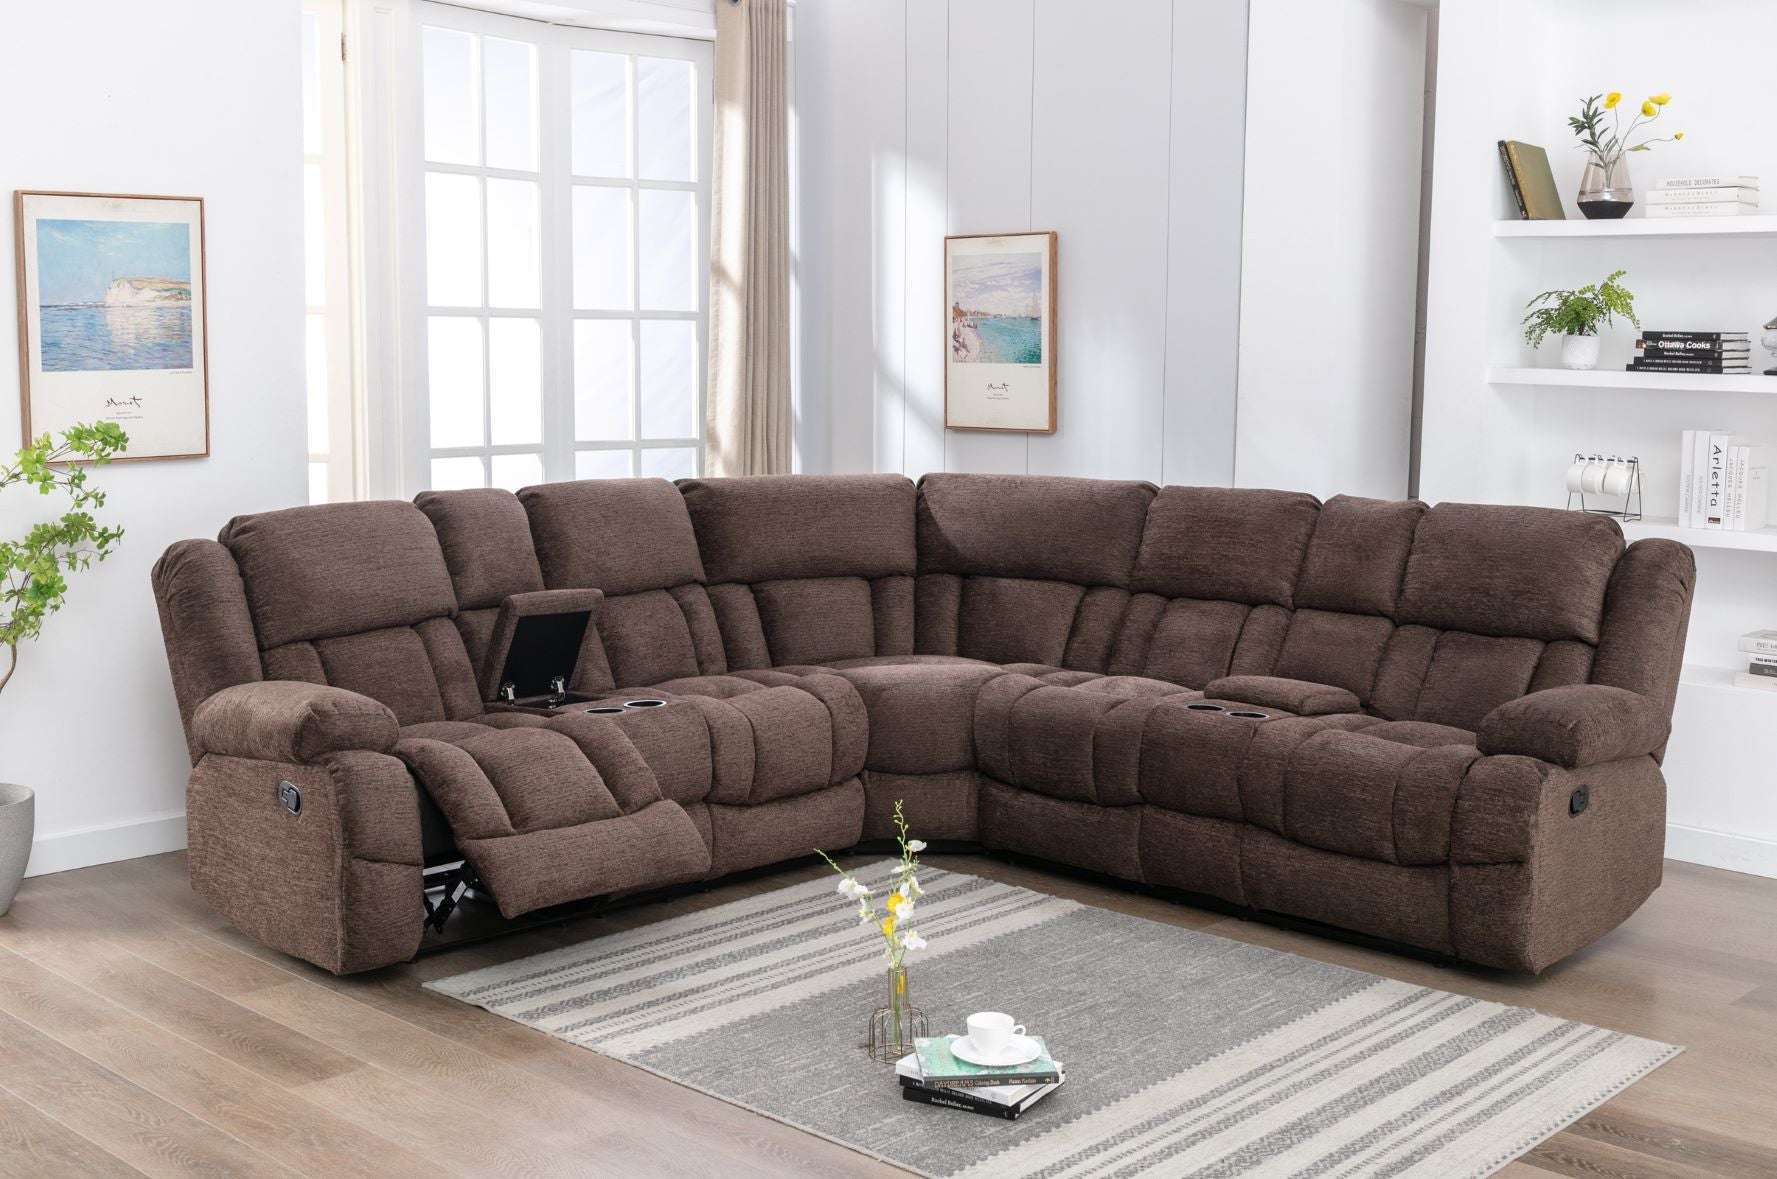 Presley Brown Fabric Recliner Sectional Sofa 99928BRW